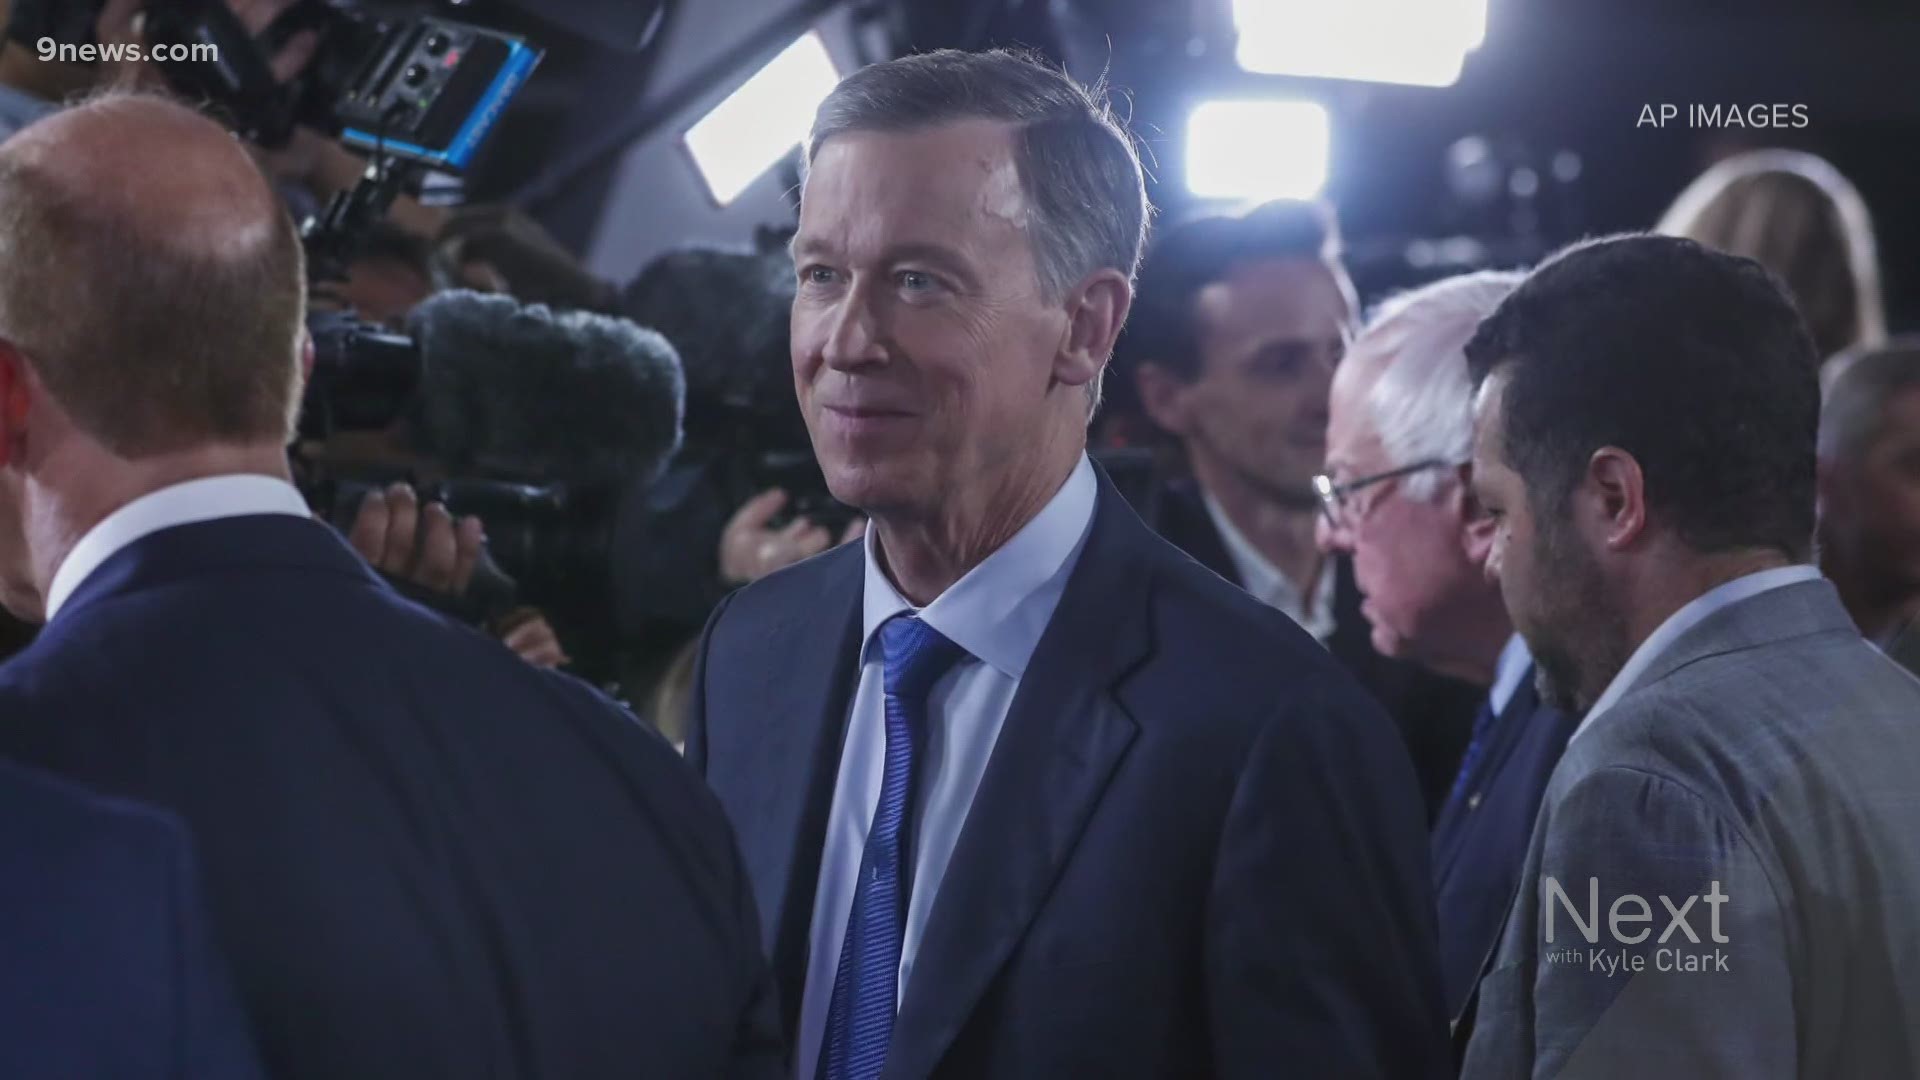 Former Governor John Hickenlooper has been told to appear at a video ethics hearing.